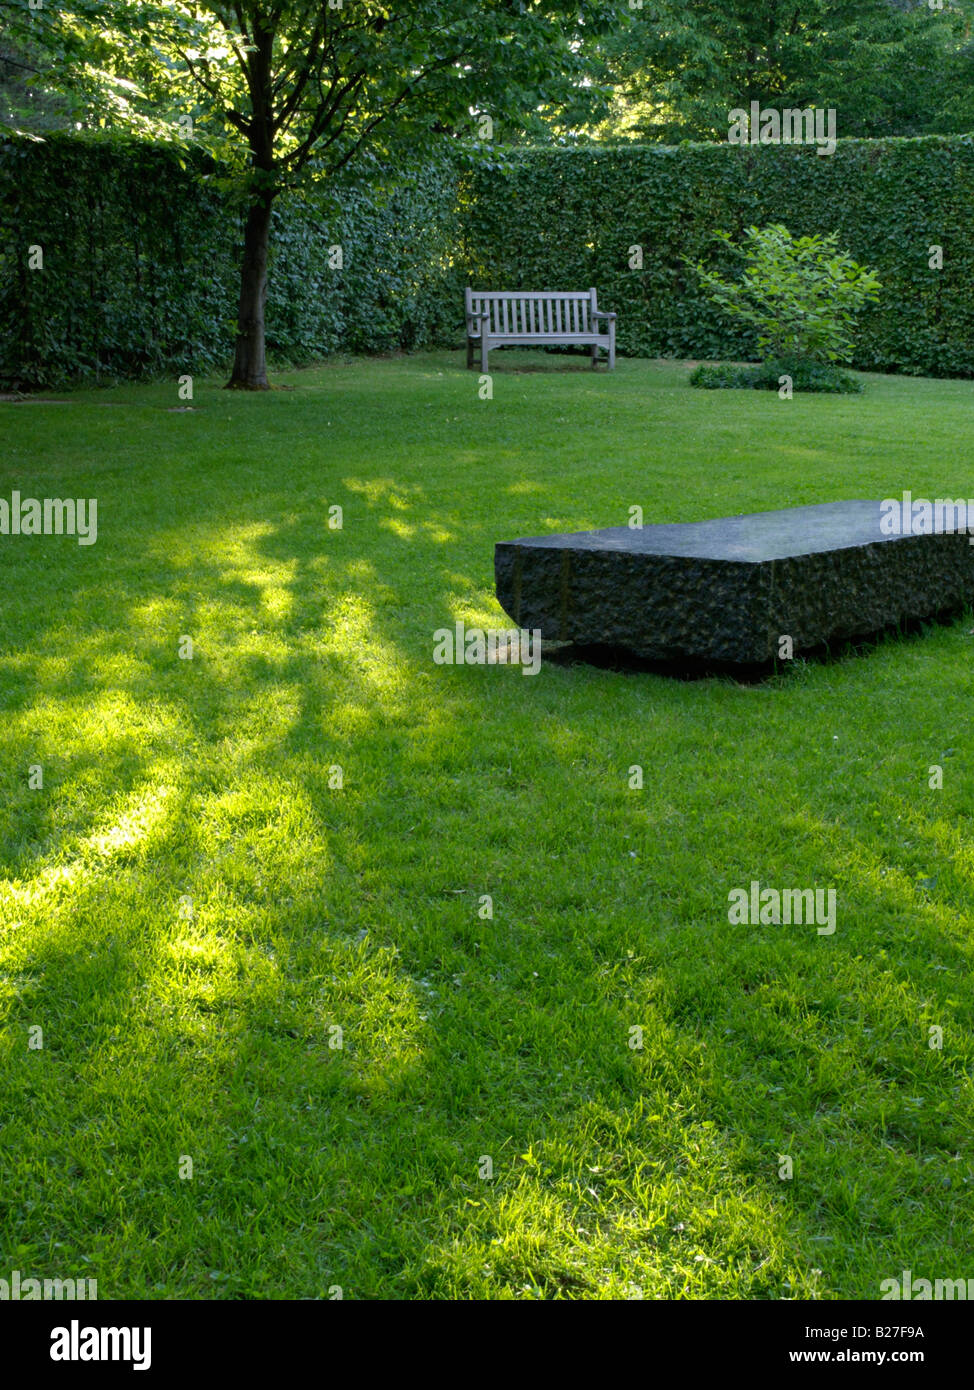 Lawn with stone bench Stock Photo